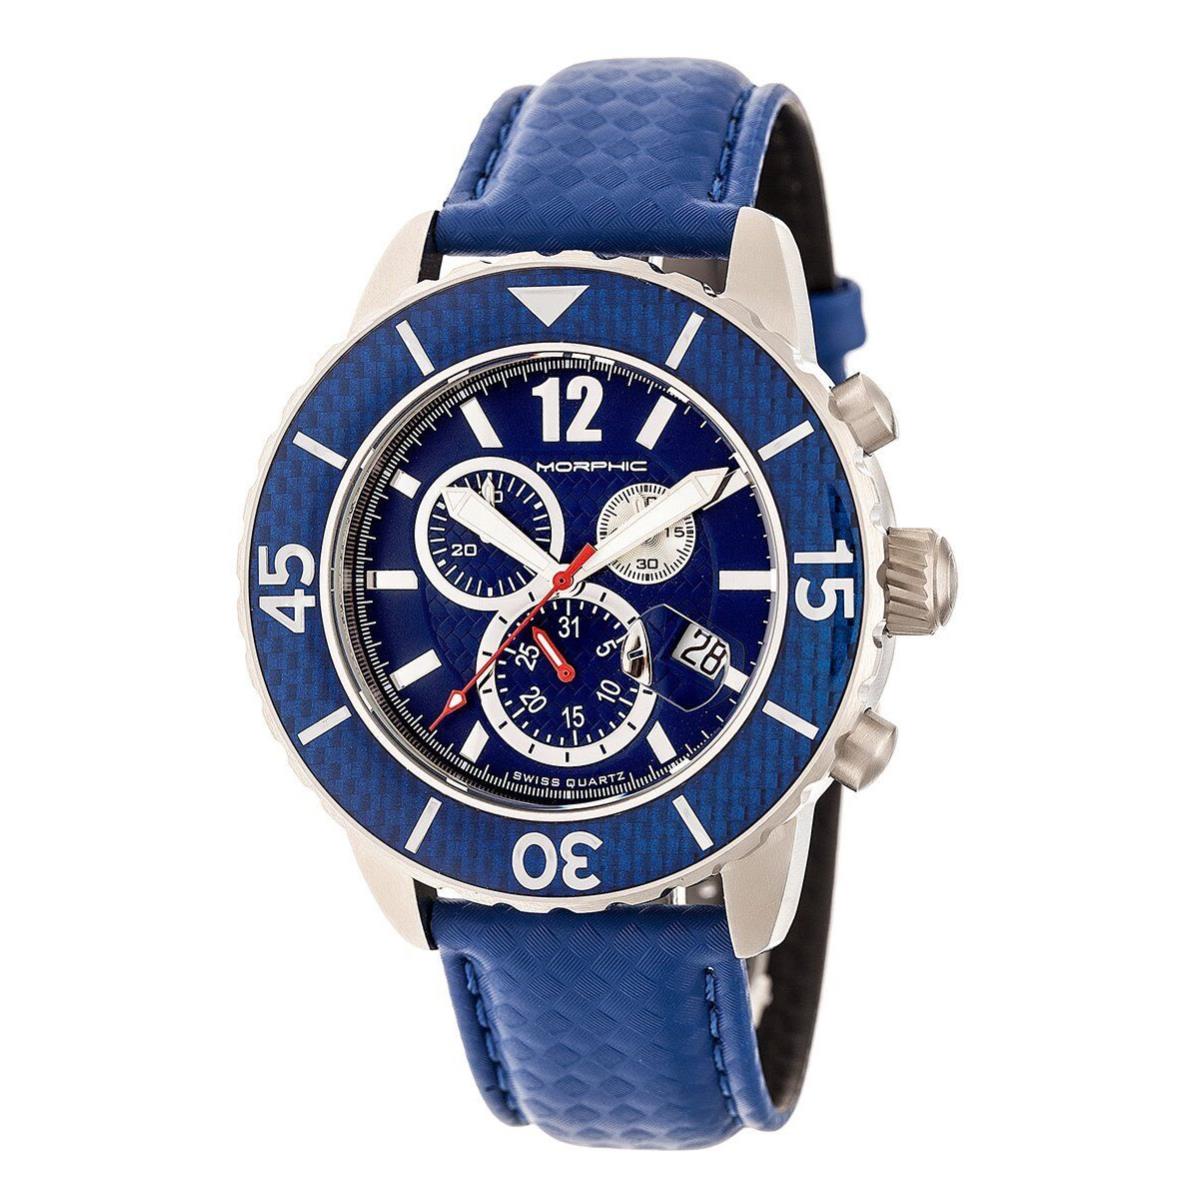 Morphic M51 Series Chronograph Date Watch Leather Blue